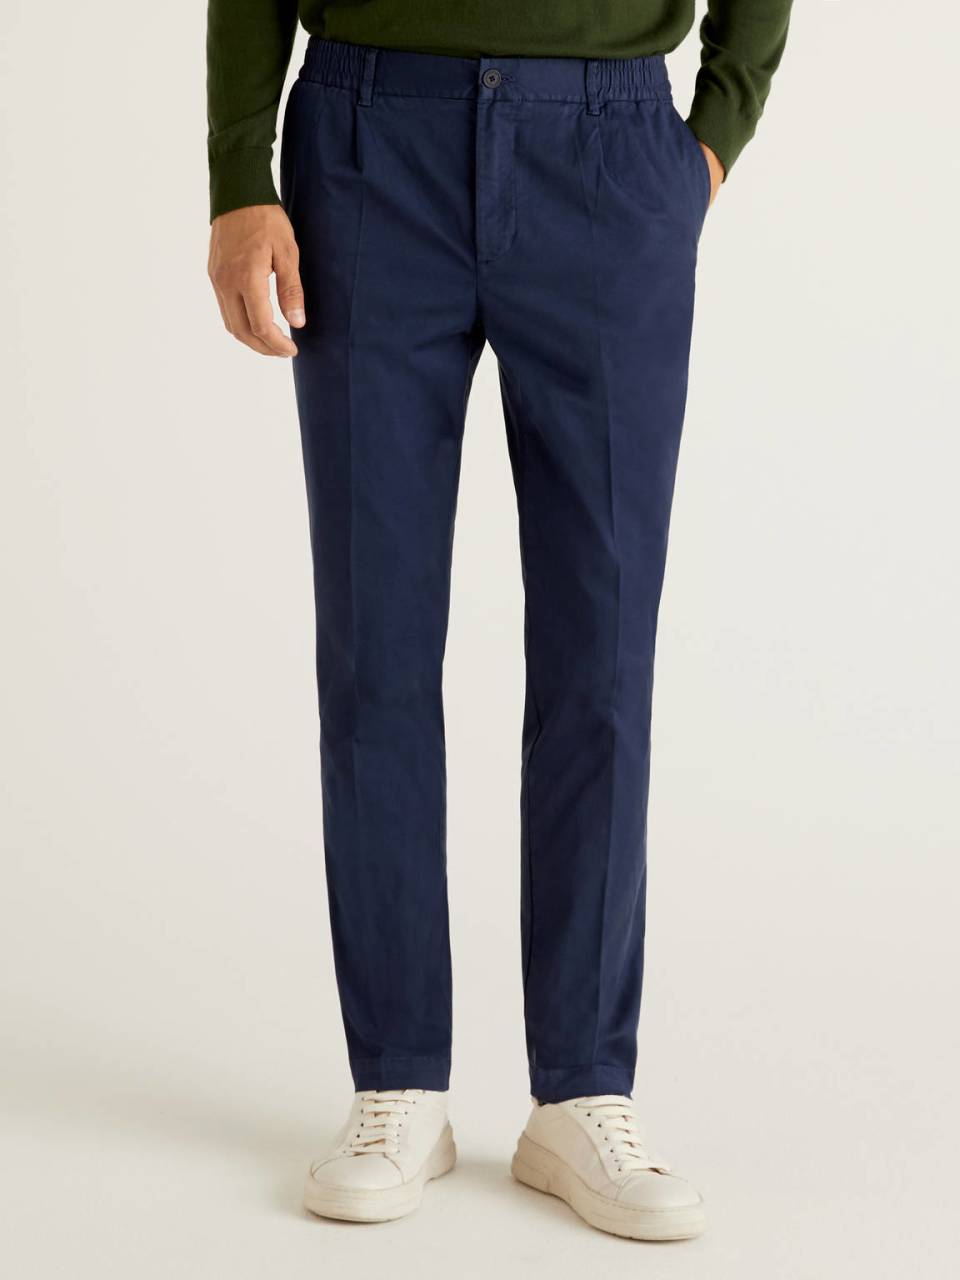 Benetton Trousers with elastic waist. 1